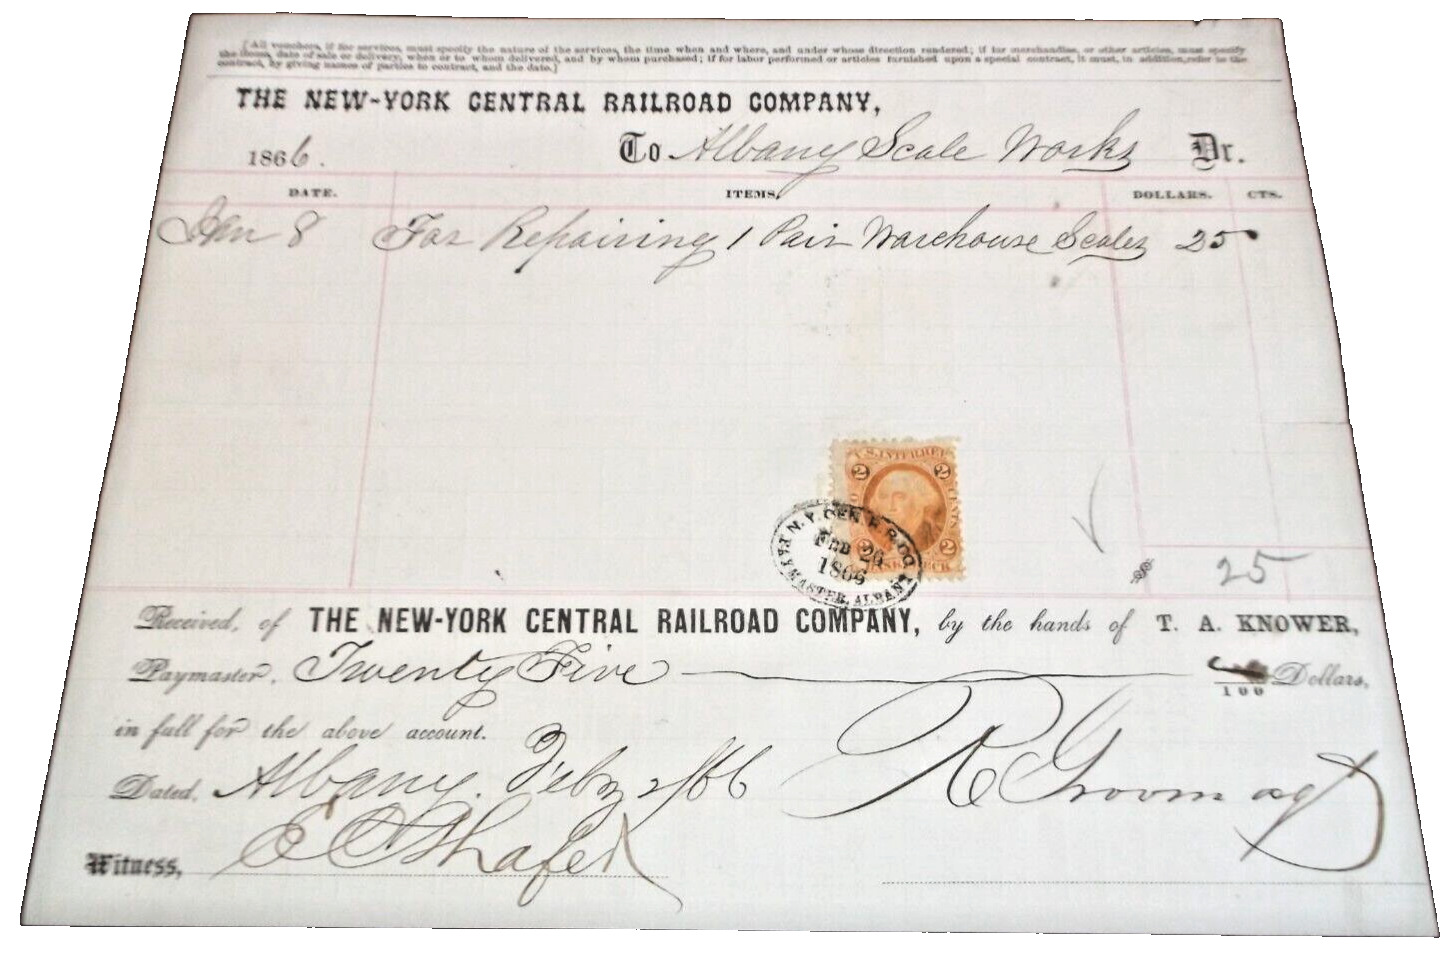 DECEMBER 1865 NYC NEW YORK CENTRAL RAILROAD CHECK VOUCHER ALBANY NEW YORK SCALES